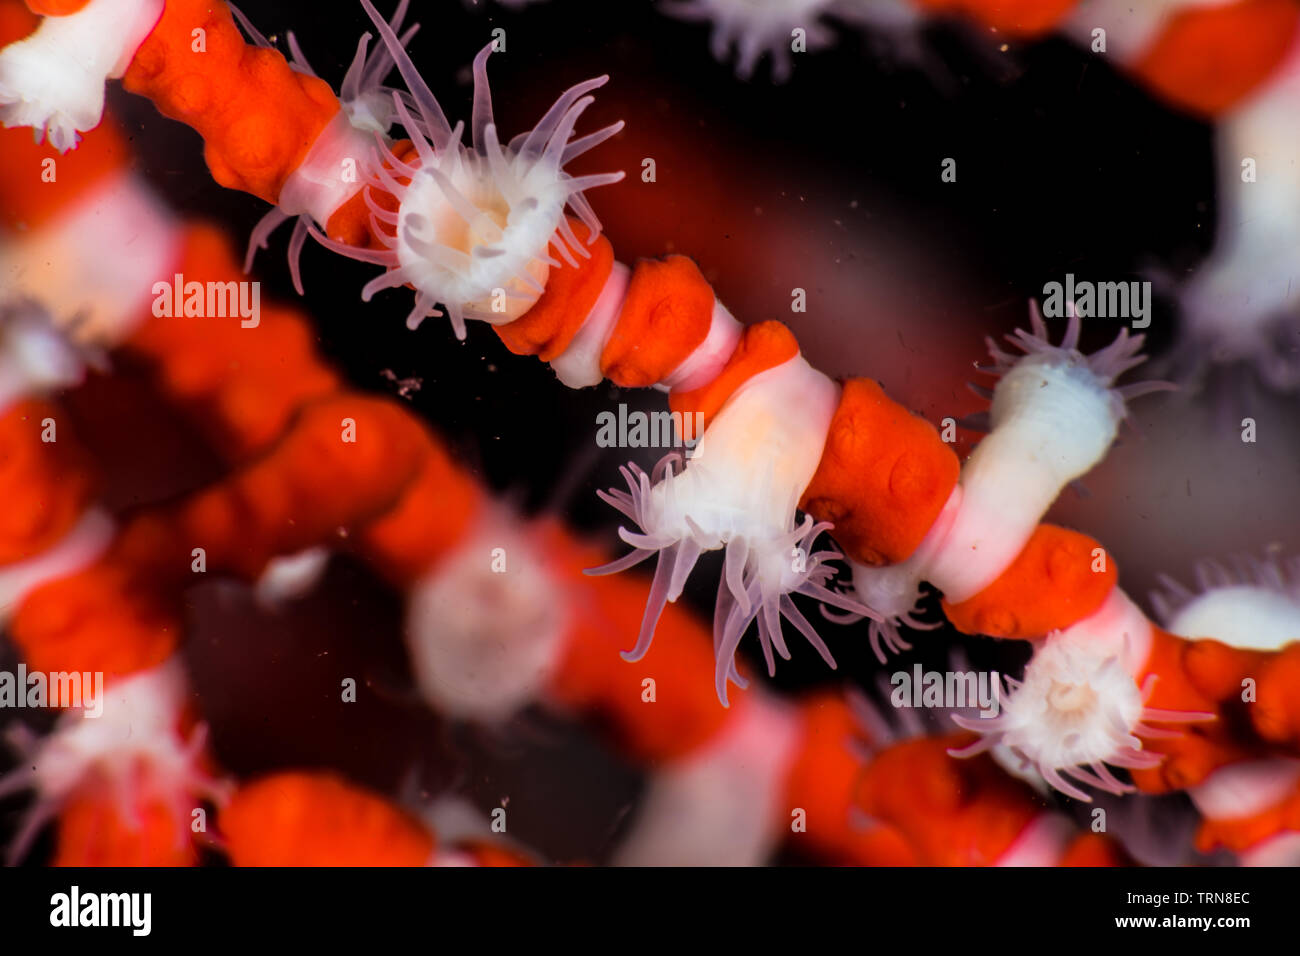 Ring sea anemones (Peranthus sp3) parasitizing the branches of gorgonians. The deep sea anemone that was found out at shallow water. -22m. at Owase Stock Photo